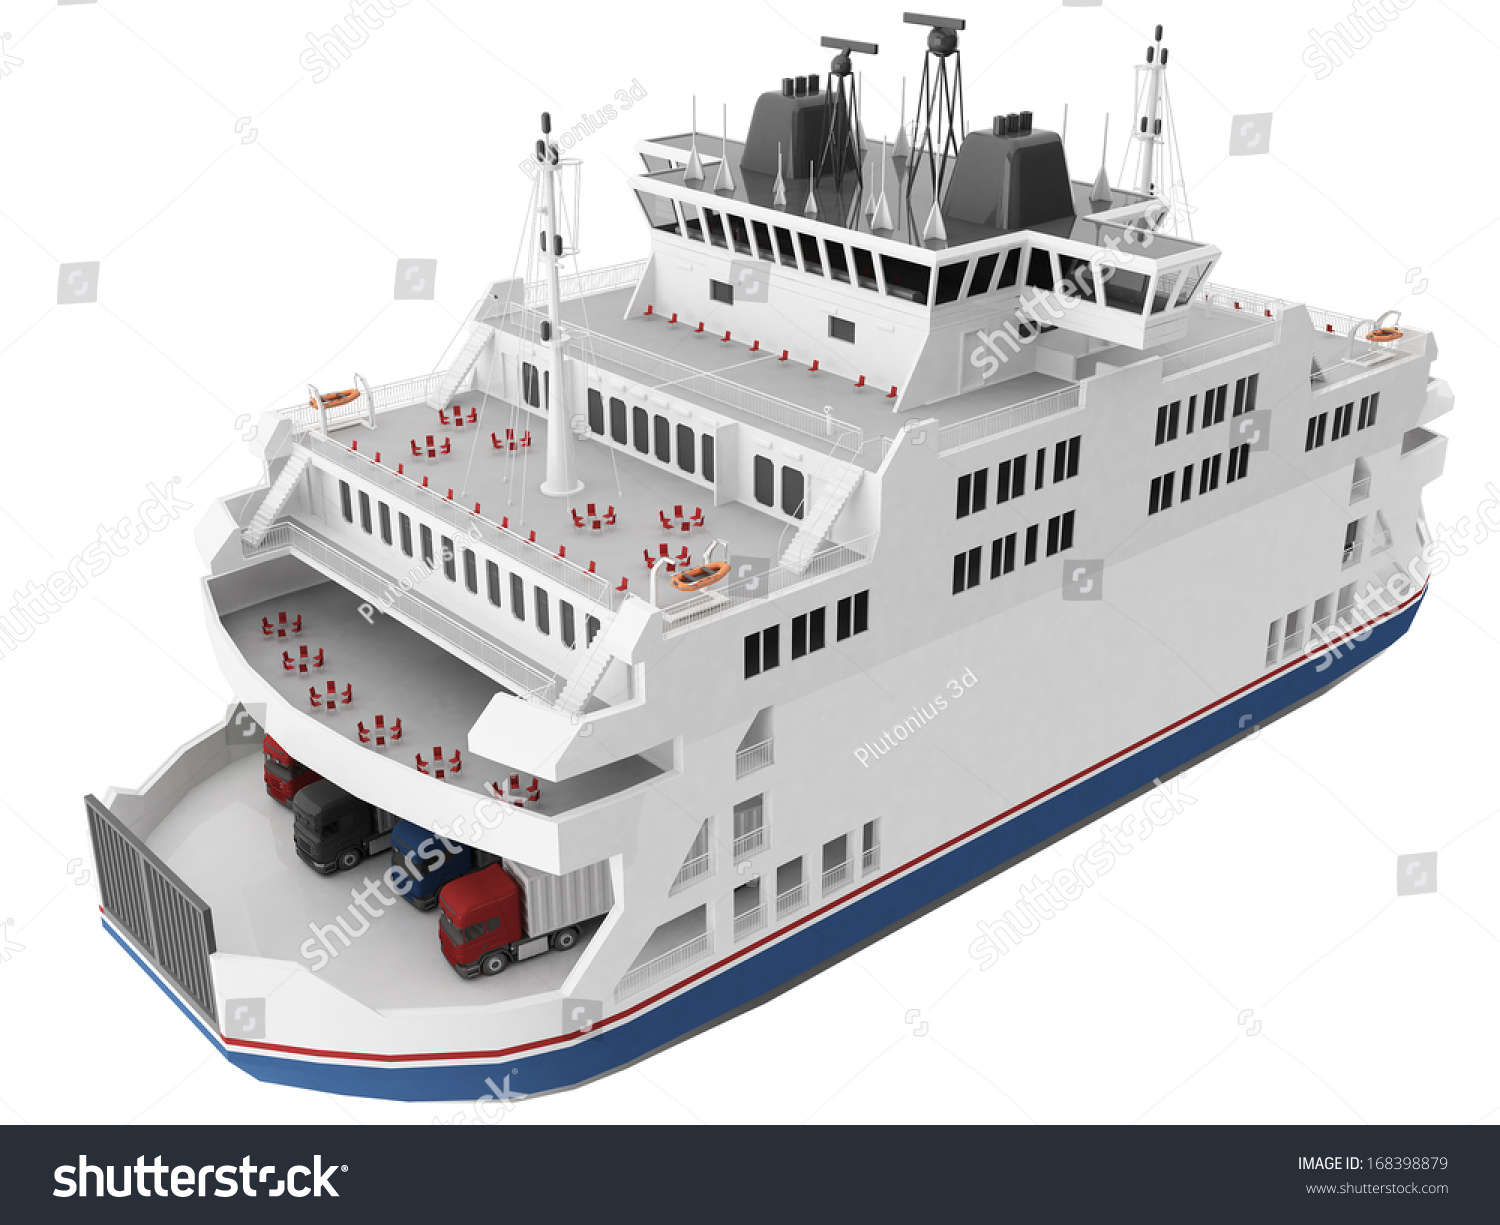 3d Rendering Of A Ferry Boat Stock Photo 168398879 : Shutterstock